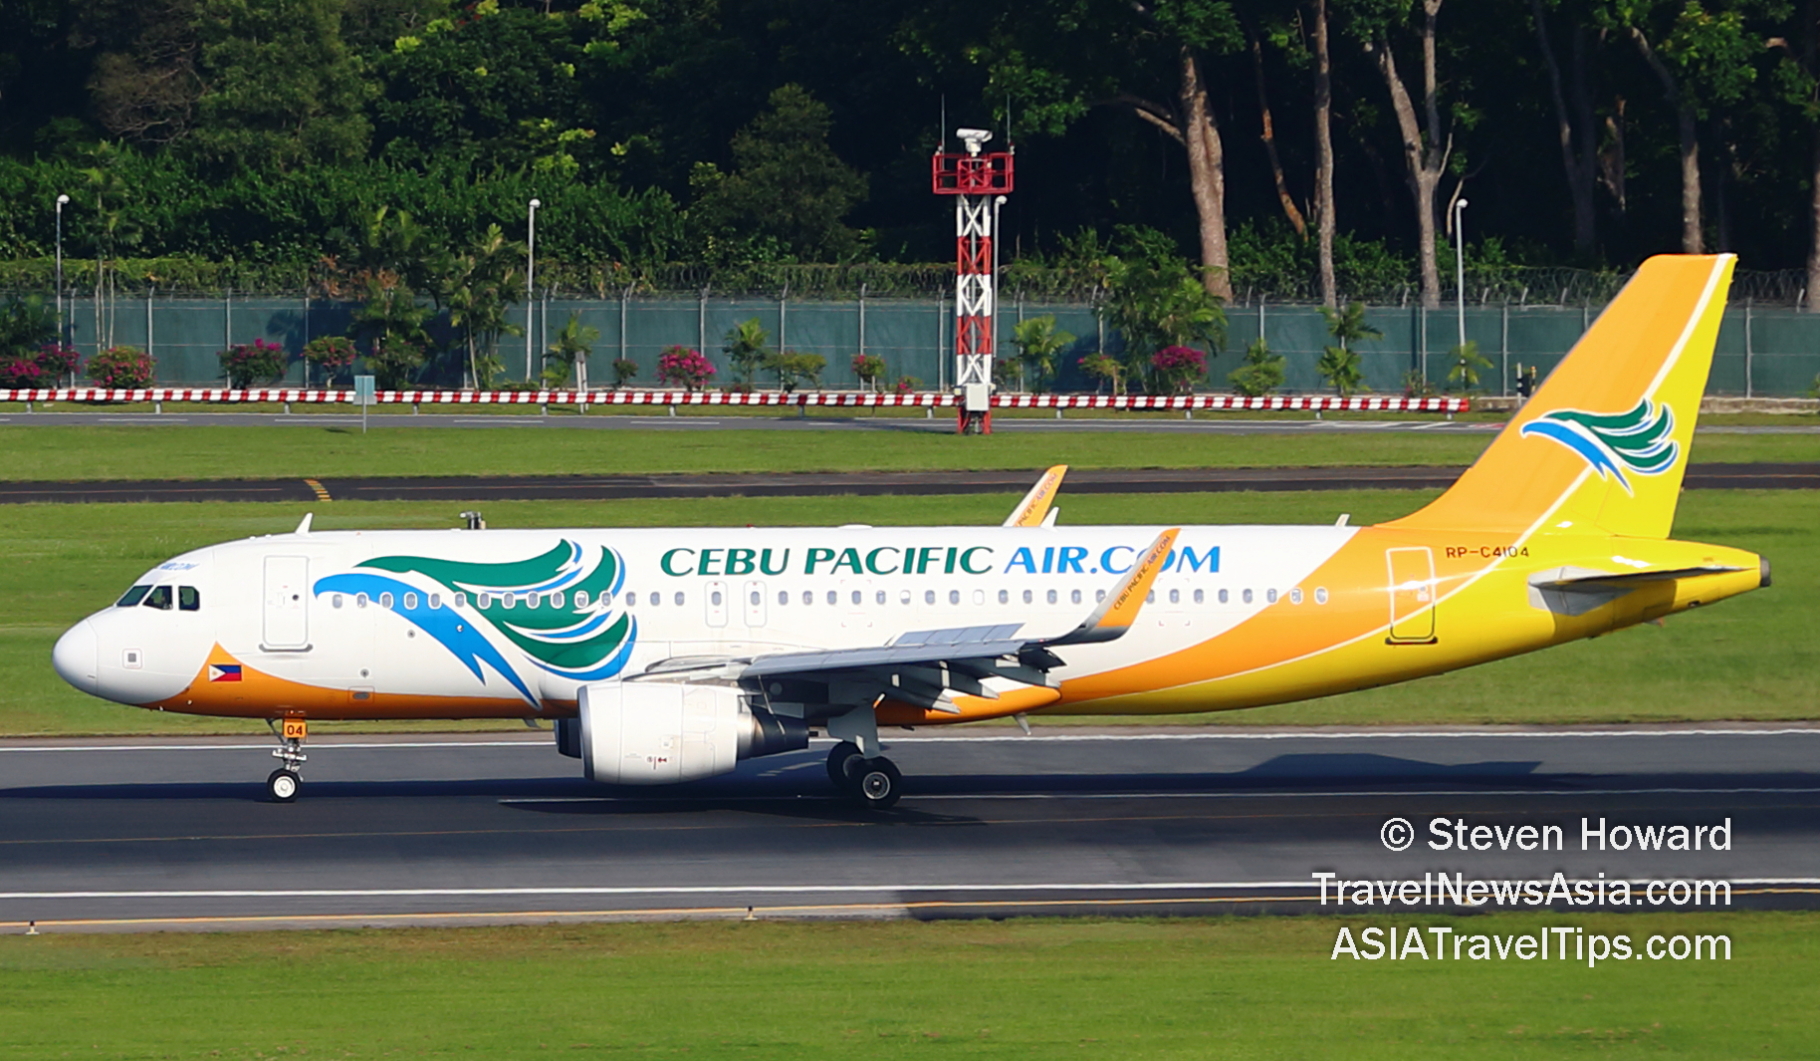 Cebu Pacific Airbus A320 reg: RP-C4104. Picture by Steven Howard of TravelNewsAsia.com Click to enlarge.